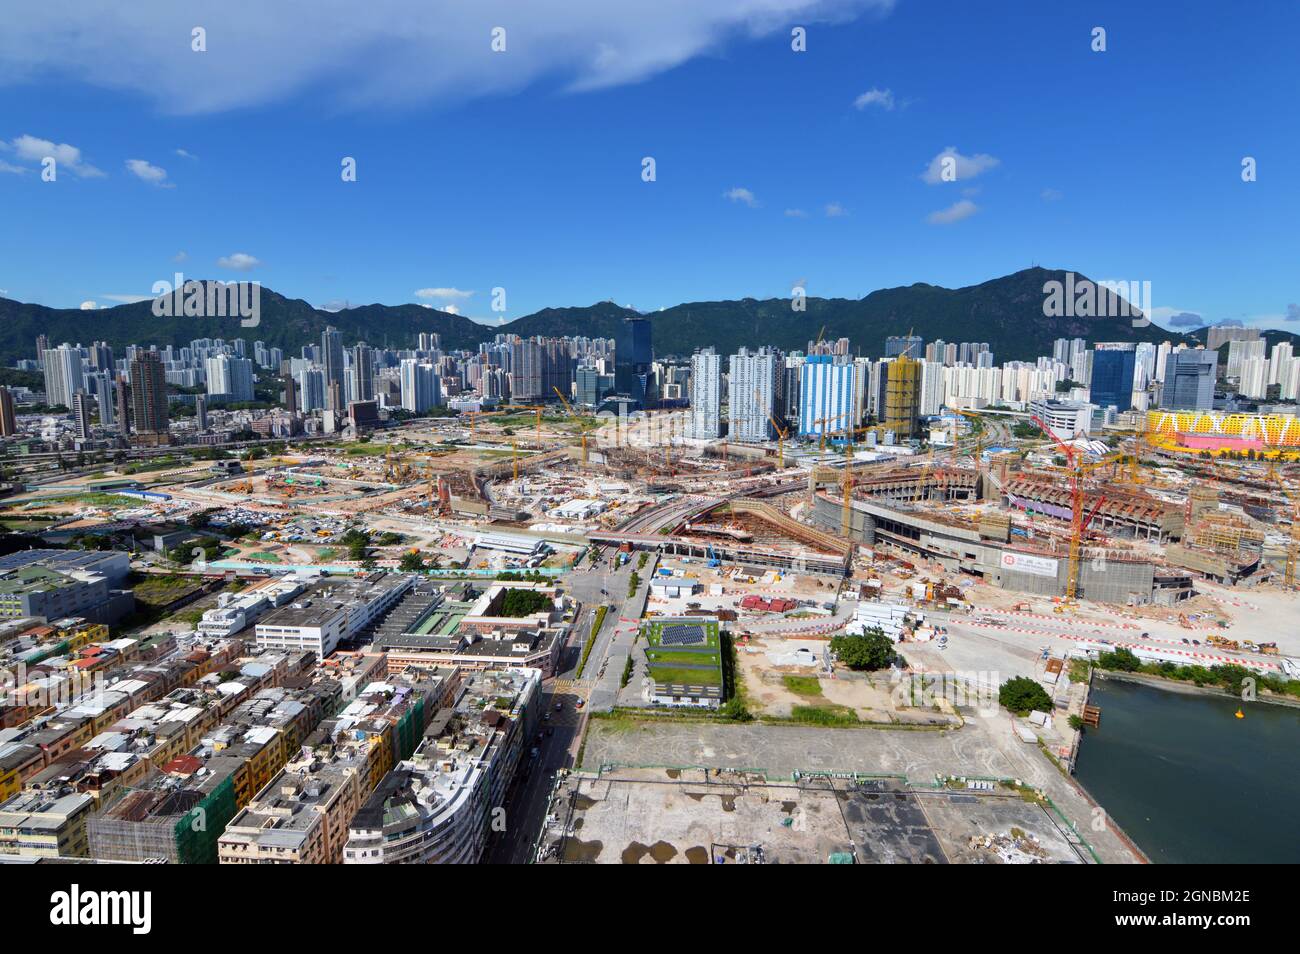 View of construction site at Kai Tak Development area (啟德發展計劃), the former site of Hong Kong's Kai Tak Airport, in September 2021 Stock Photo